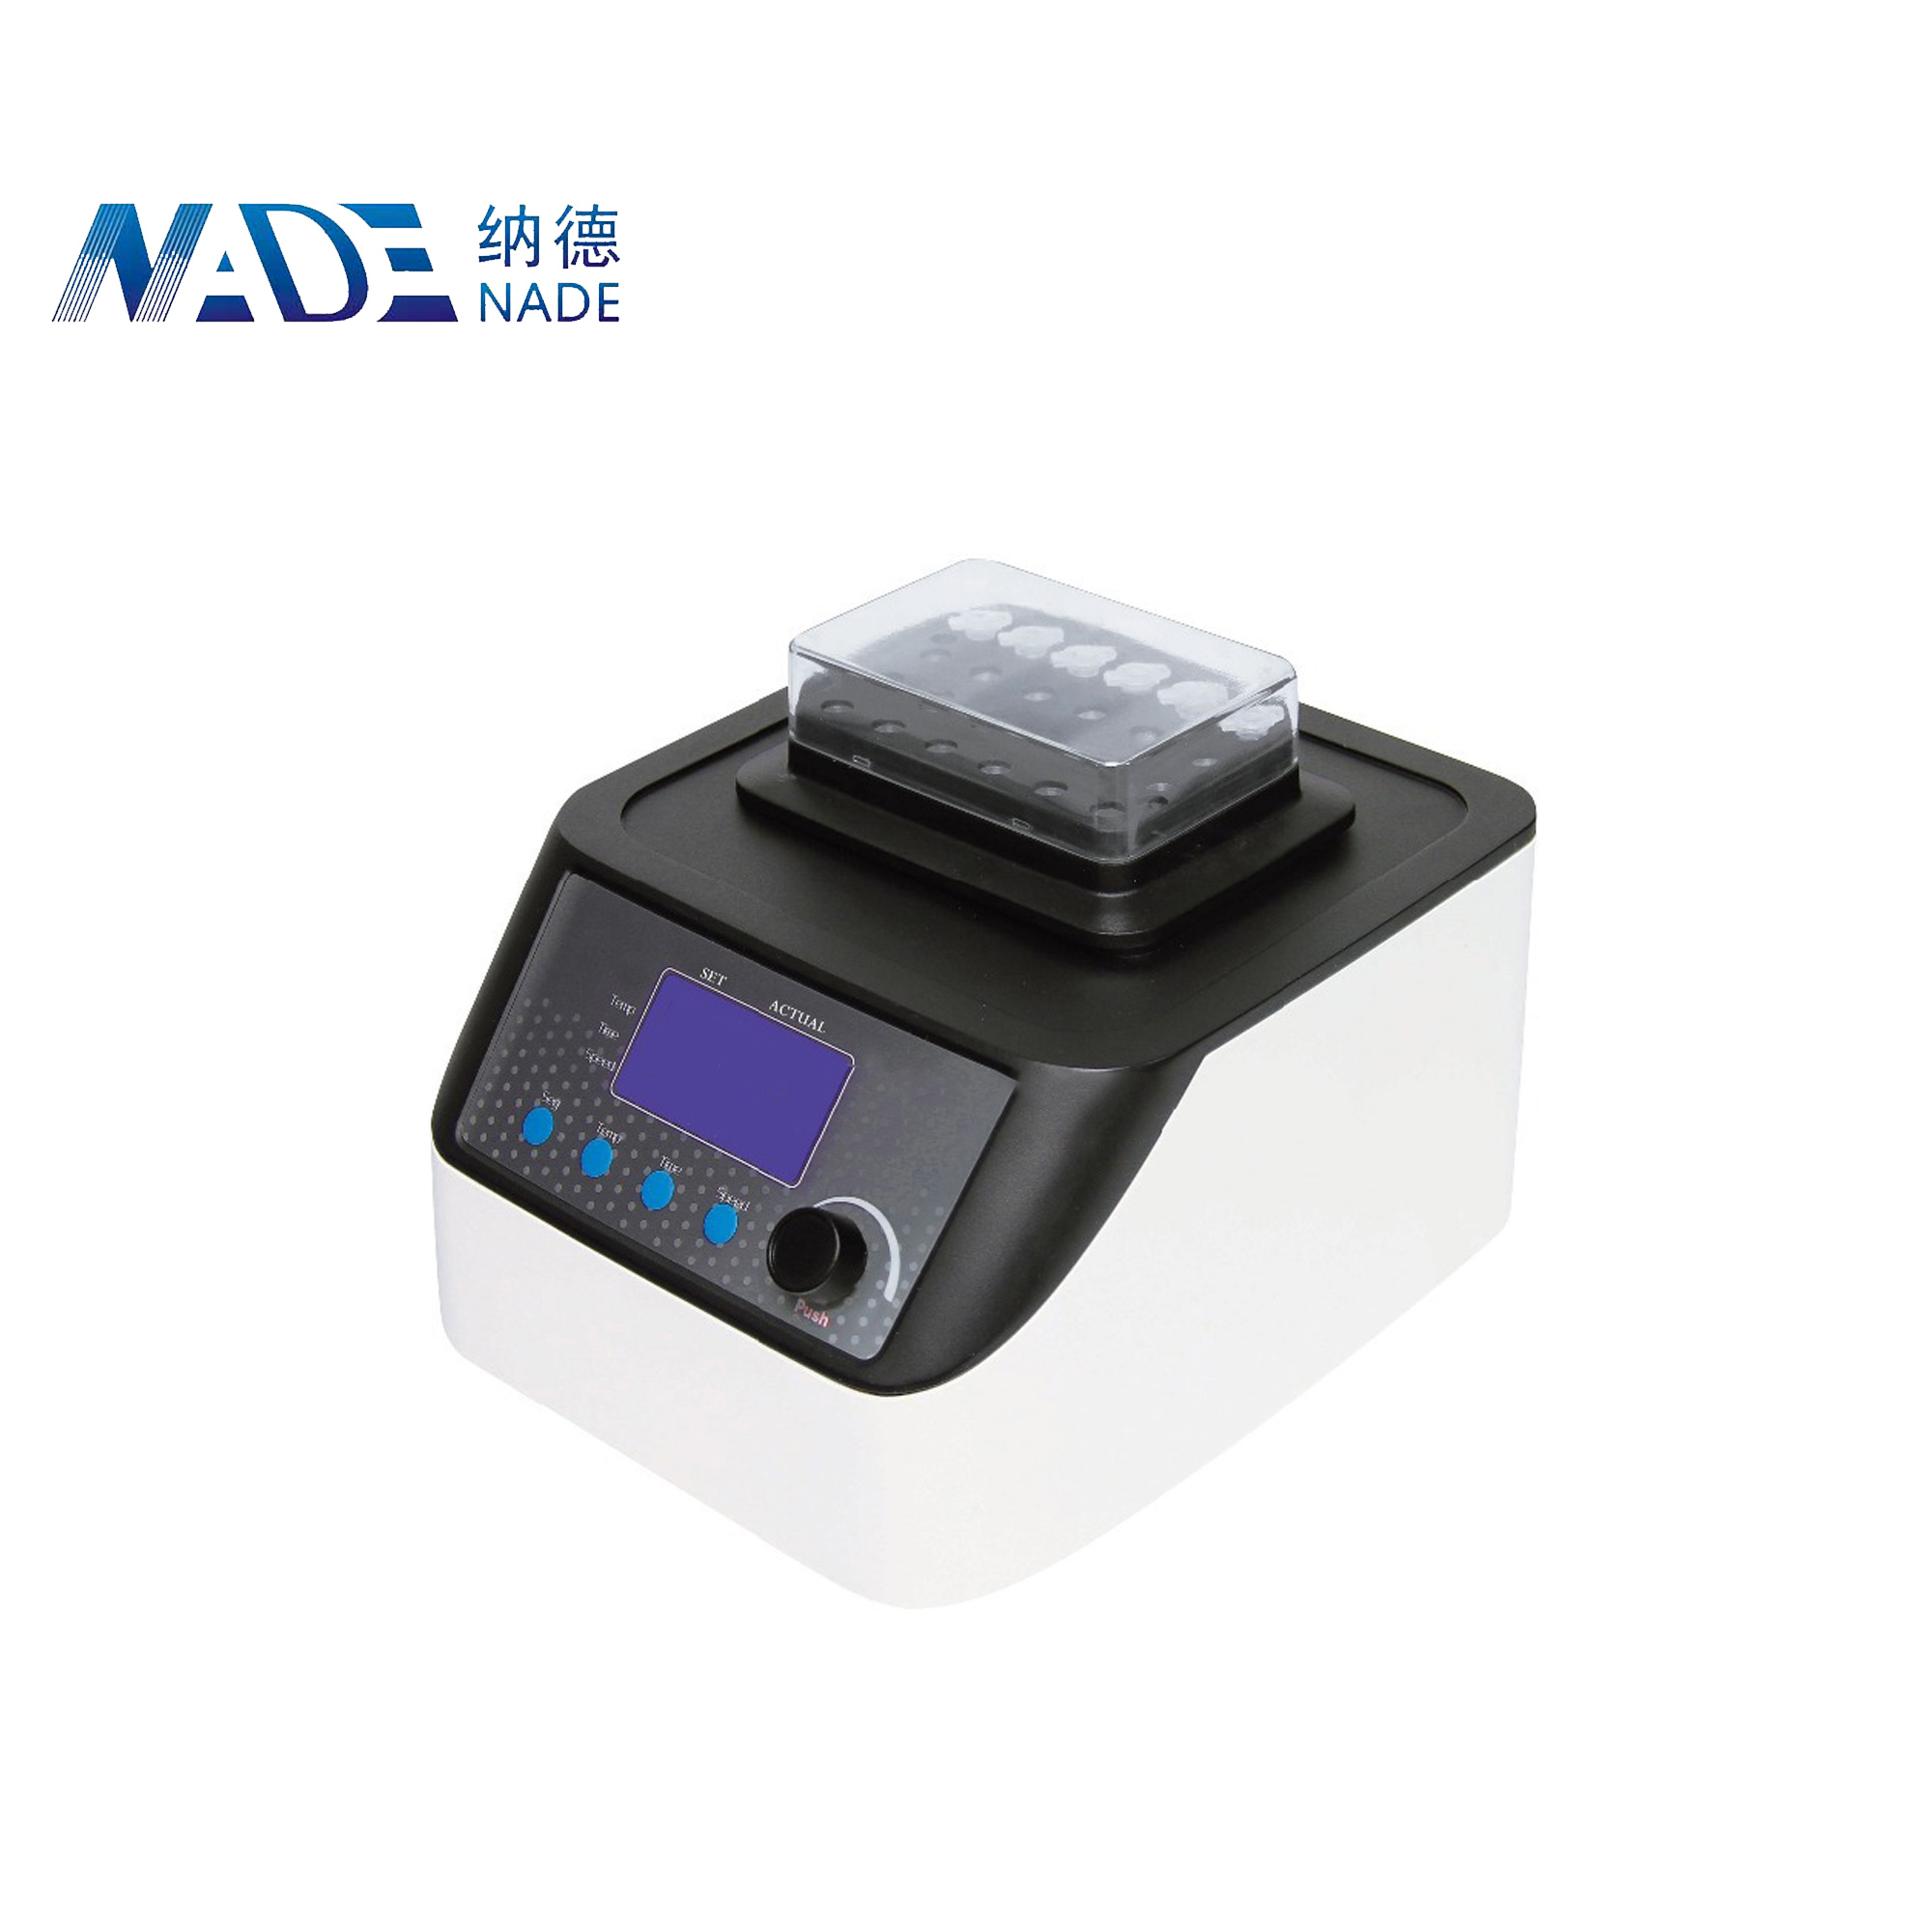 NADE Cooling and Heating Mix Thermo Shaker Incubator